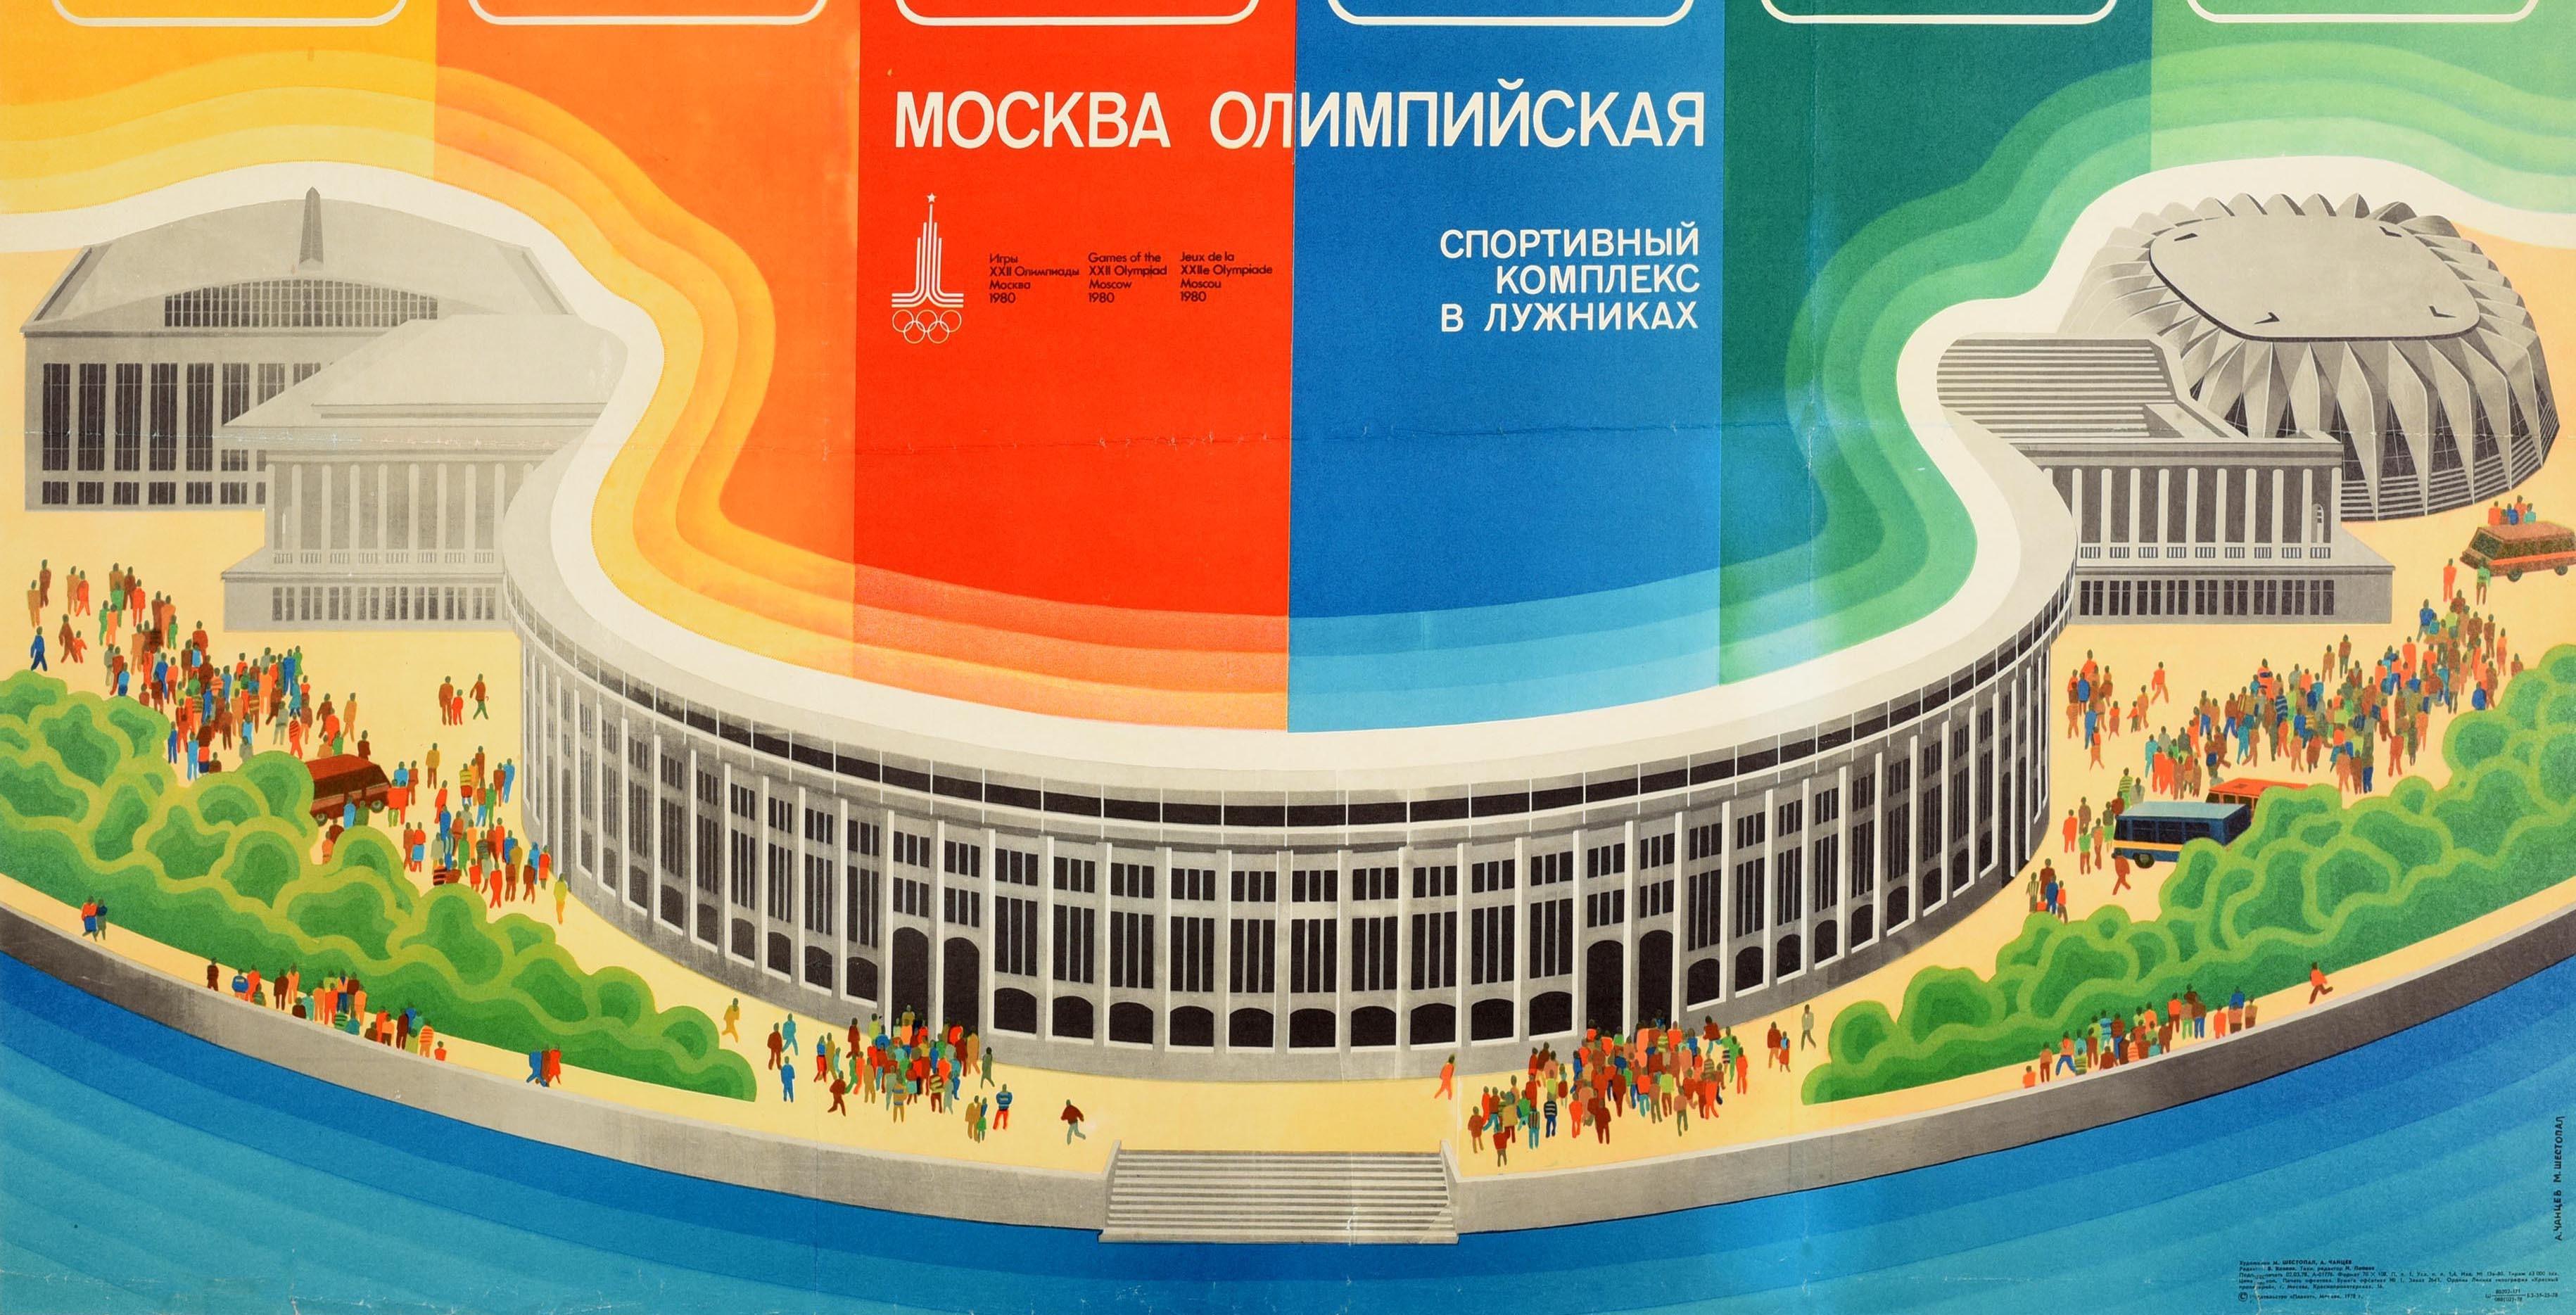 Original vintage sports poster promoting the 22nd Summer Olympic Games / Games of the XXII Olympiad in 1980 held in Moscow Russia featuring people walking in front of Dynamo Stadium, lush green trees in the foreground, with the text and Olympics